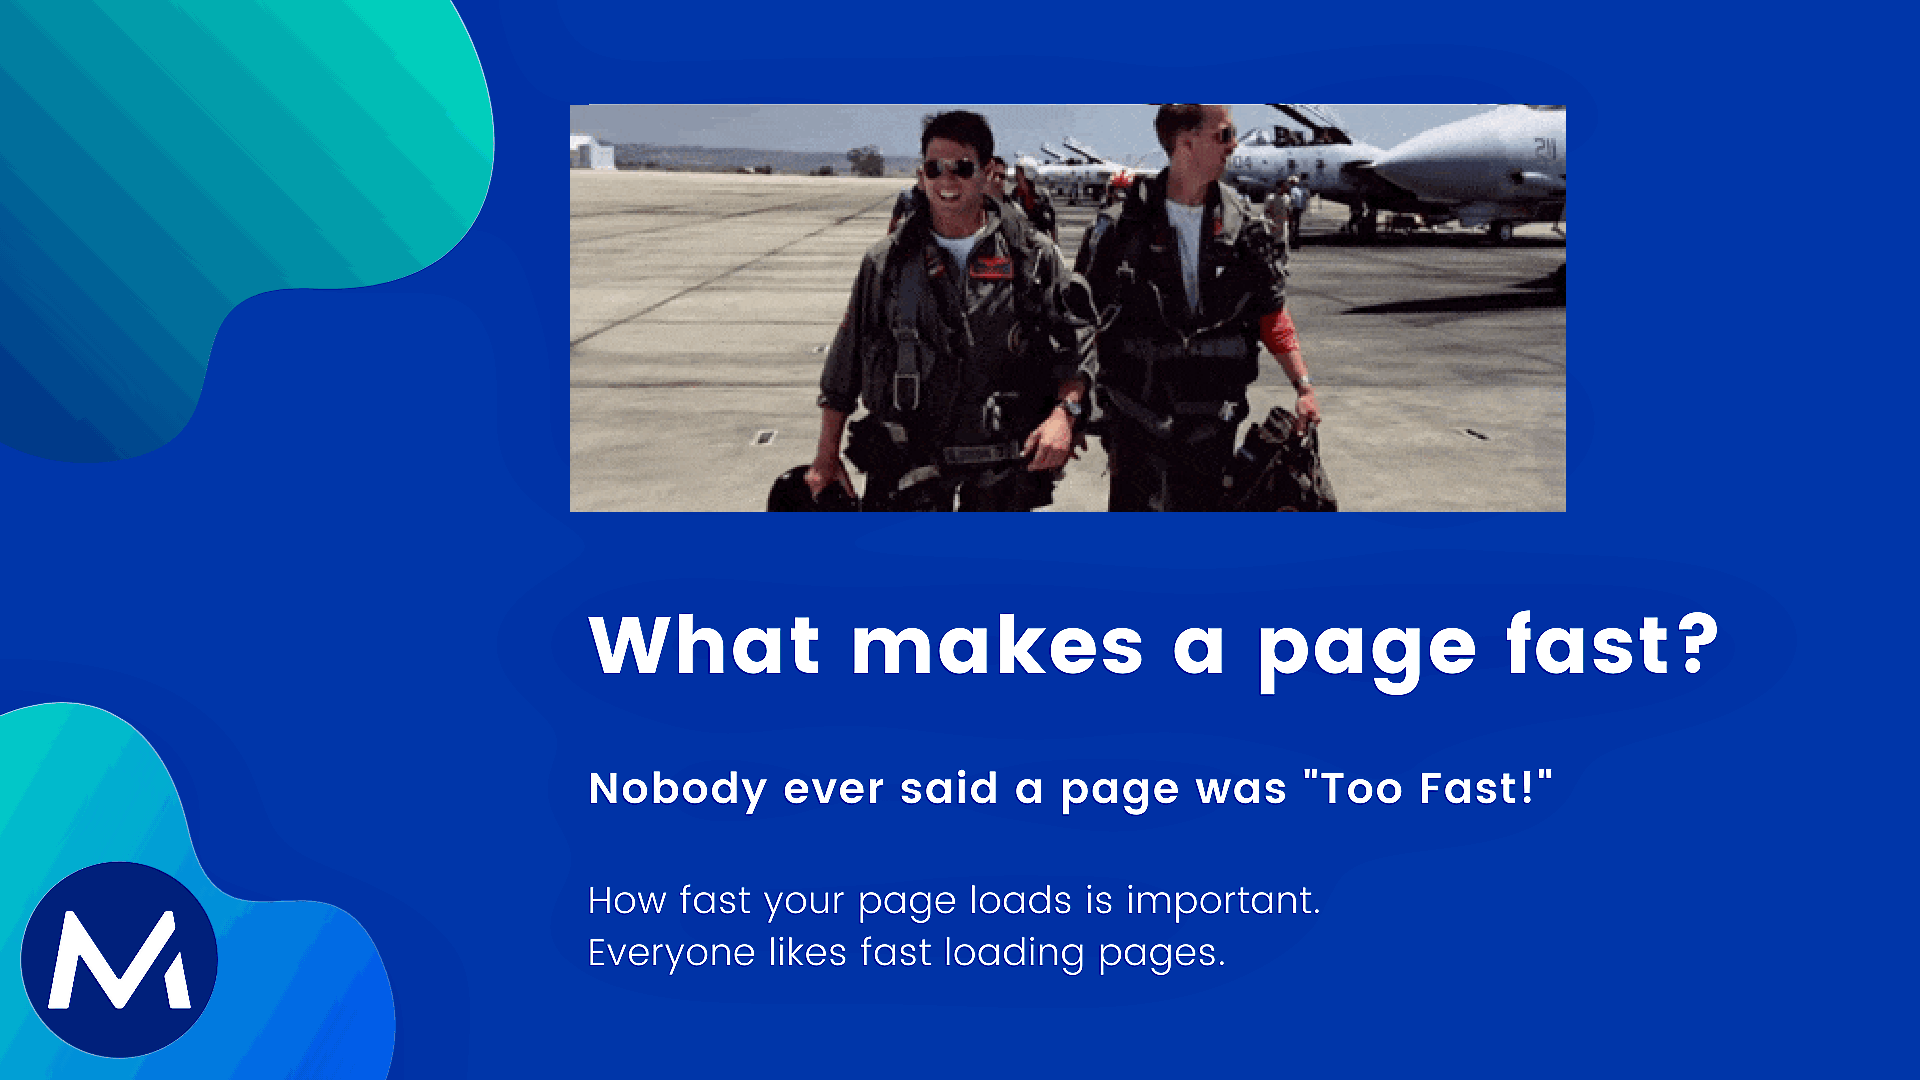 Importance of a fast page